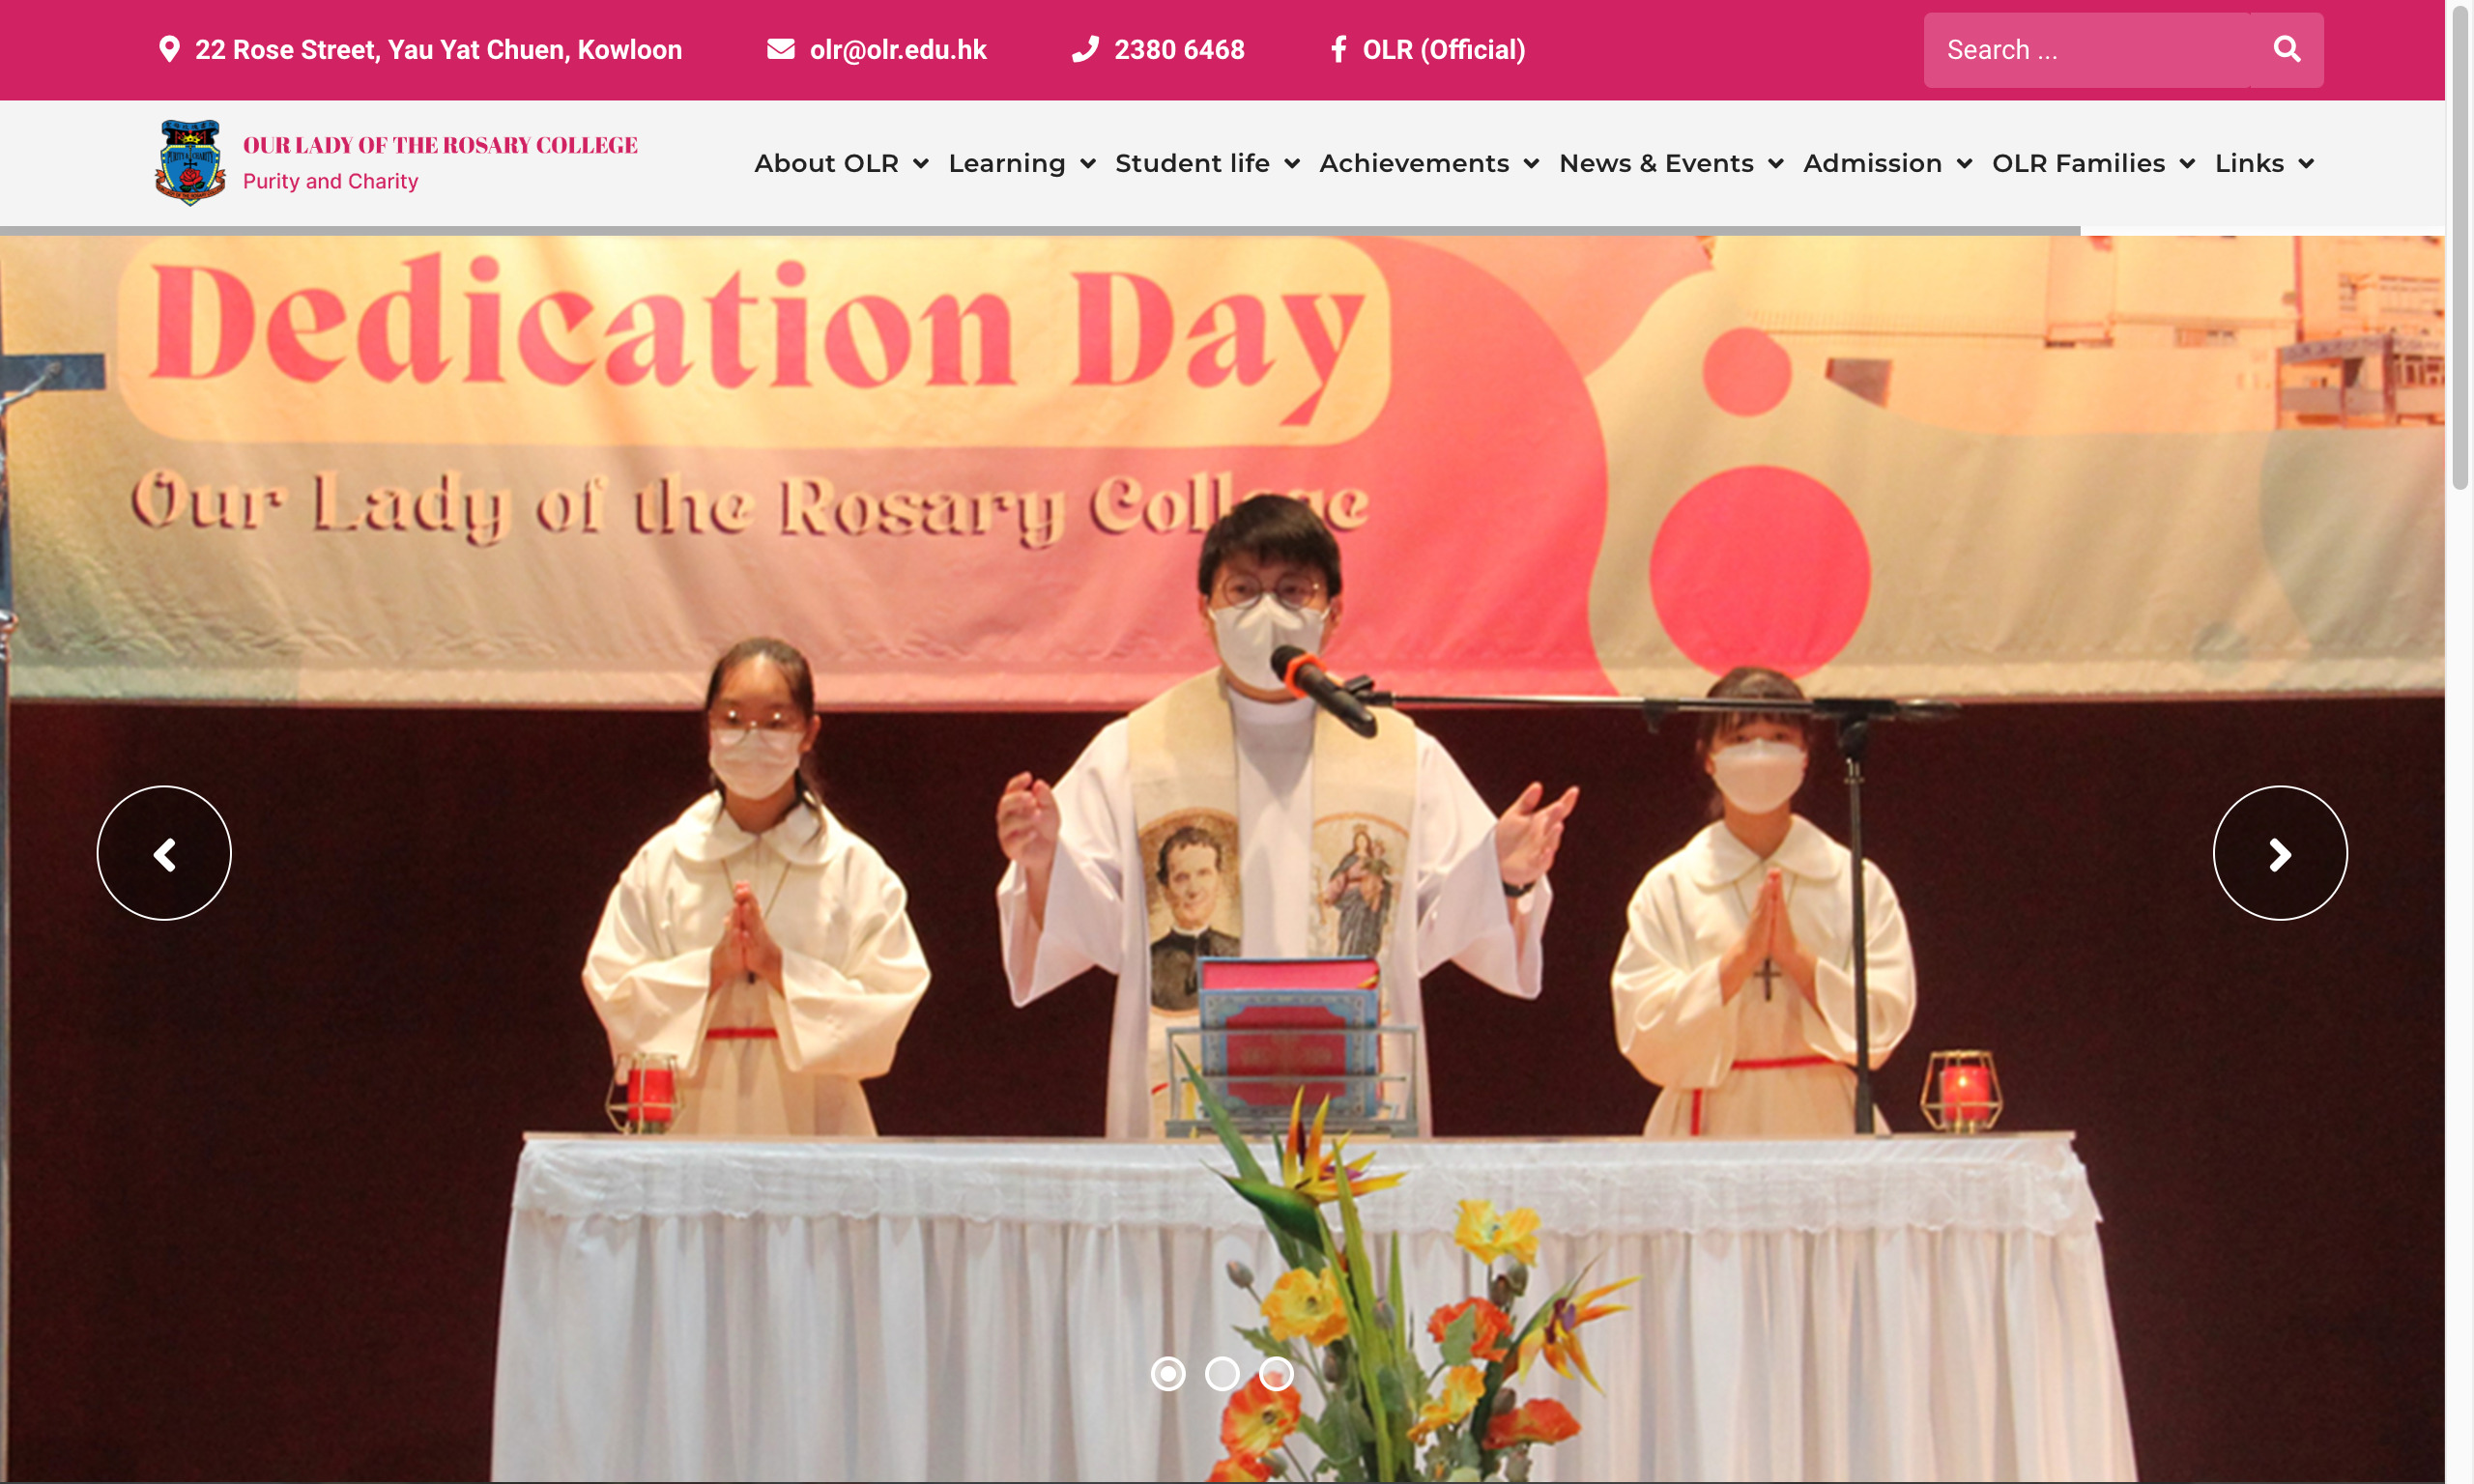 Screenshot of the Home Page of Our Lady of The Rosary College